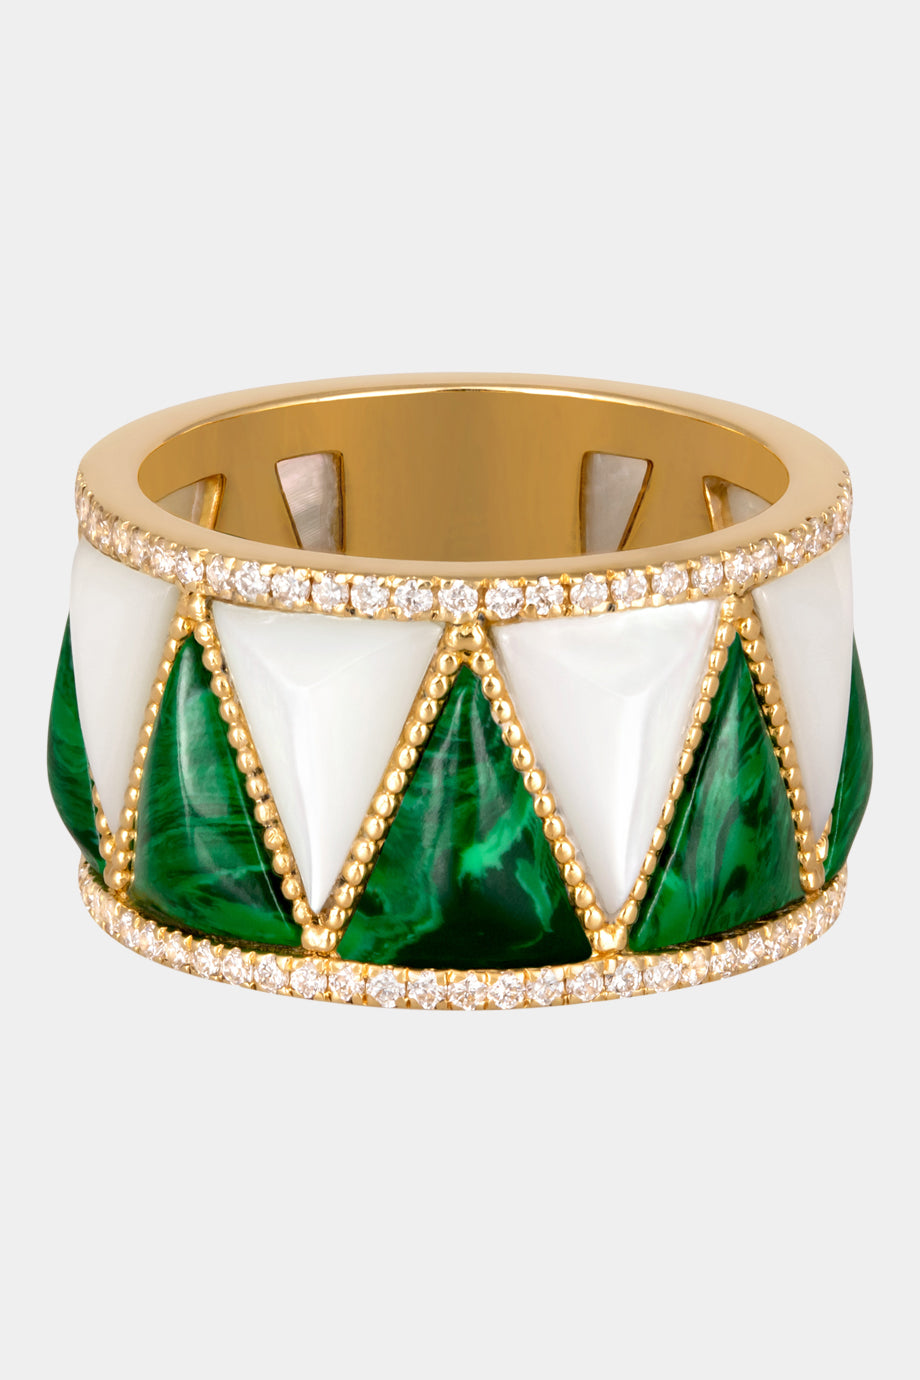 Soho Gold Encrusted With Malachite And Mother Of Pearl Pulse Ring